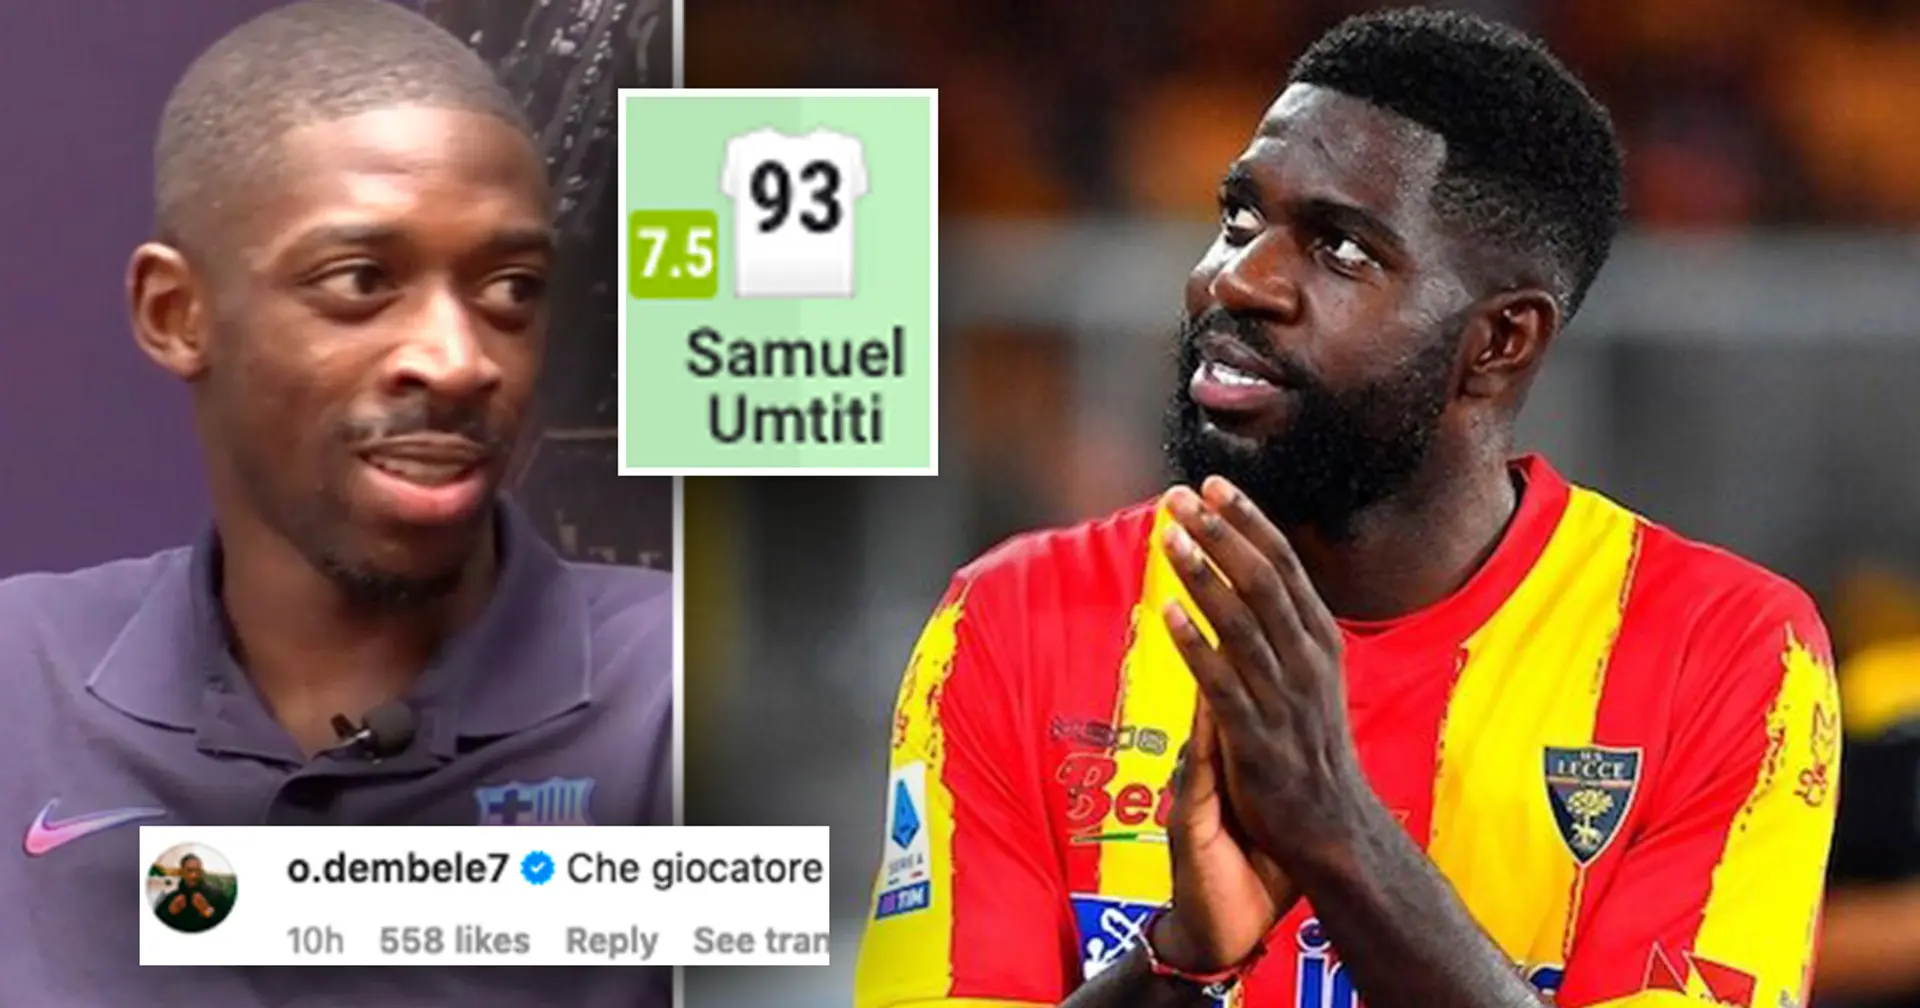 Dembele reacts as Umtiti drops another defensive masterclass on loan